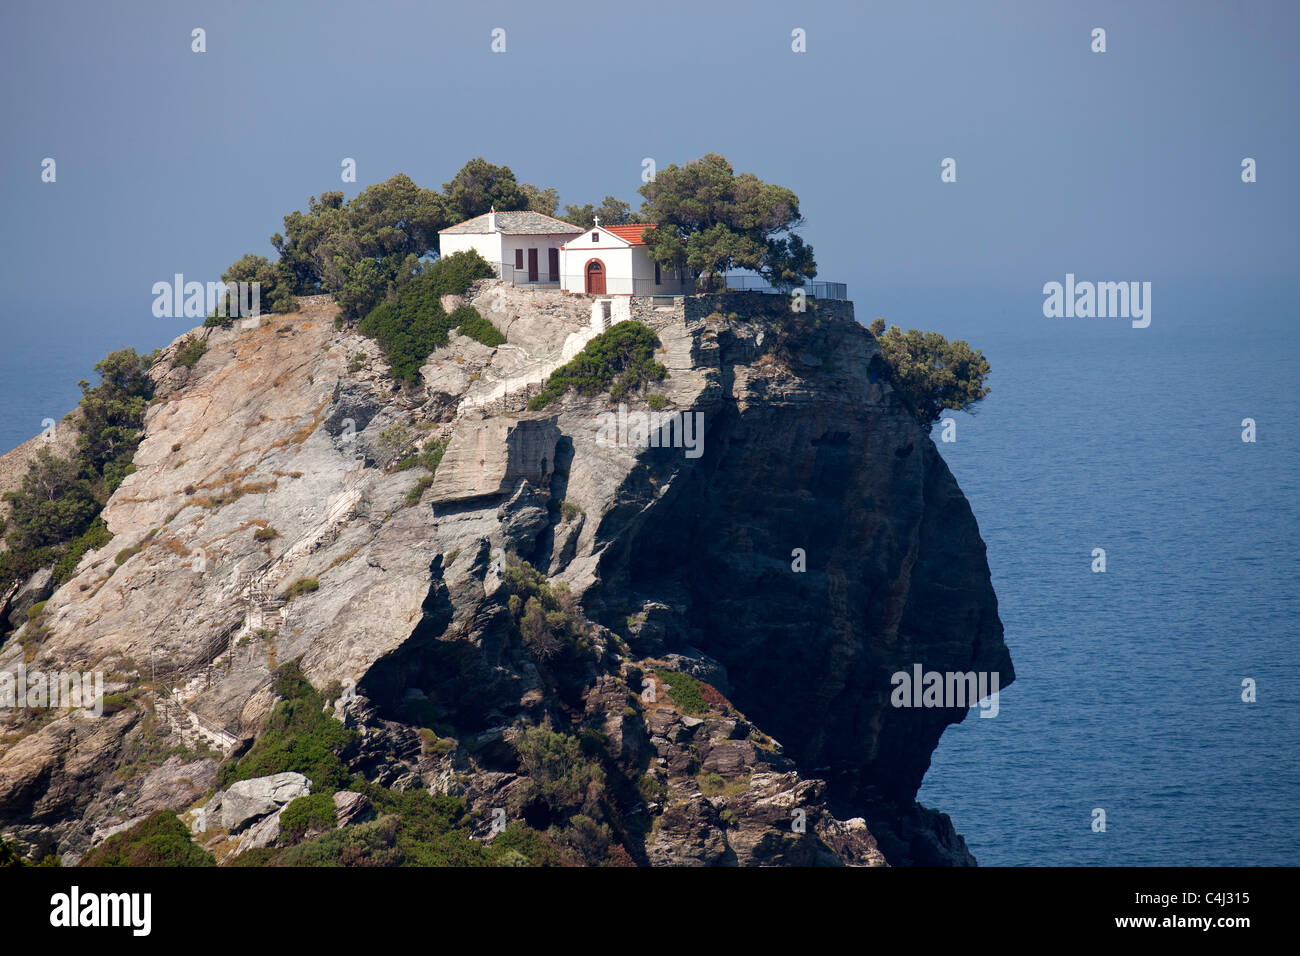 Mamma Mia Church High Resolution Stock Photography and Images - Alamy